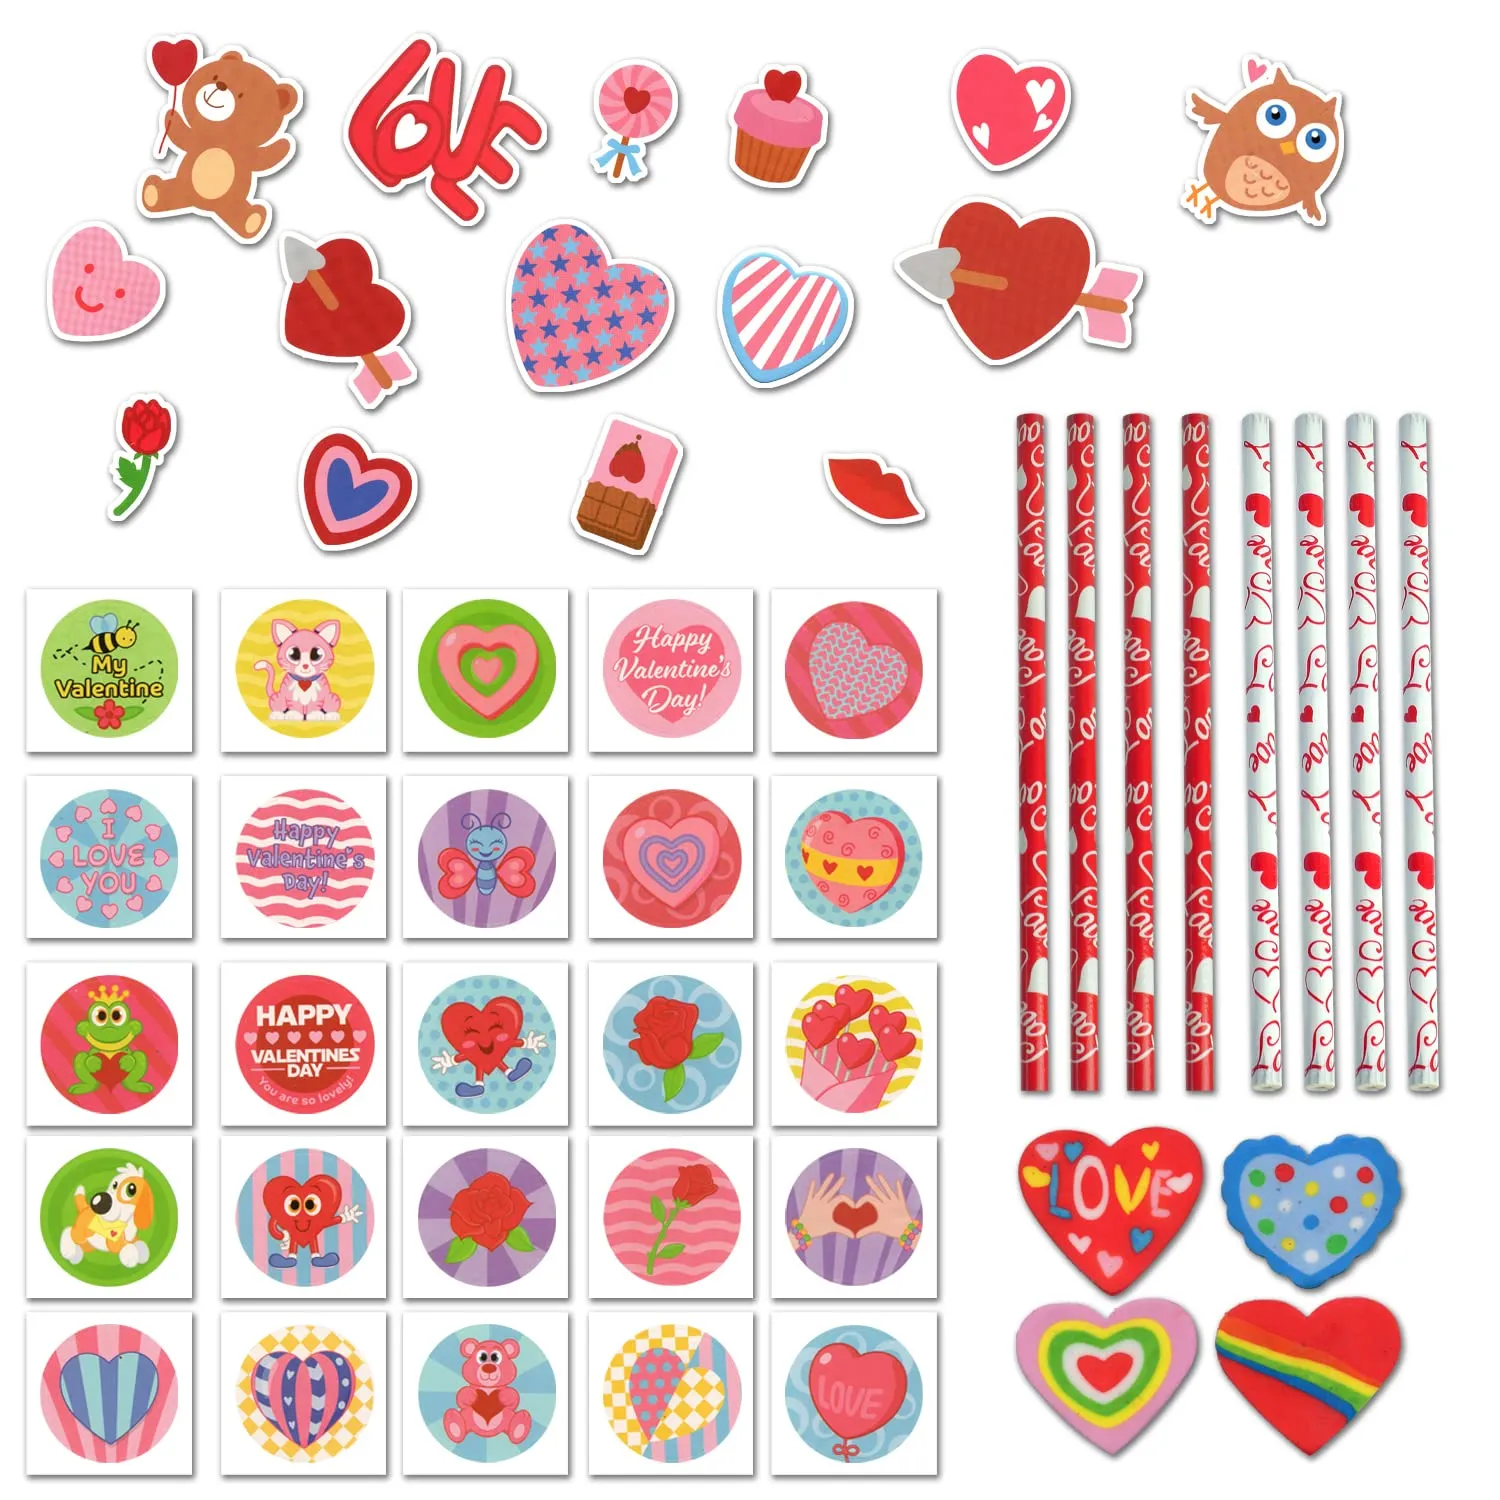 JOYIN 26 Pack Valentine Party Favors Set, DIY Goody Bags with 156 Pcs Valentine Themed Toys Include Pencil, Ruler,Eraser,Sticker, Notebook for Kids